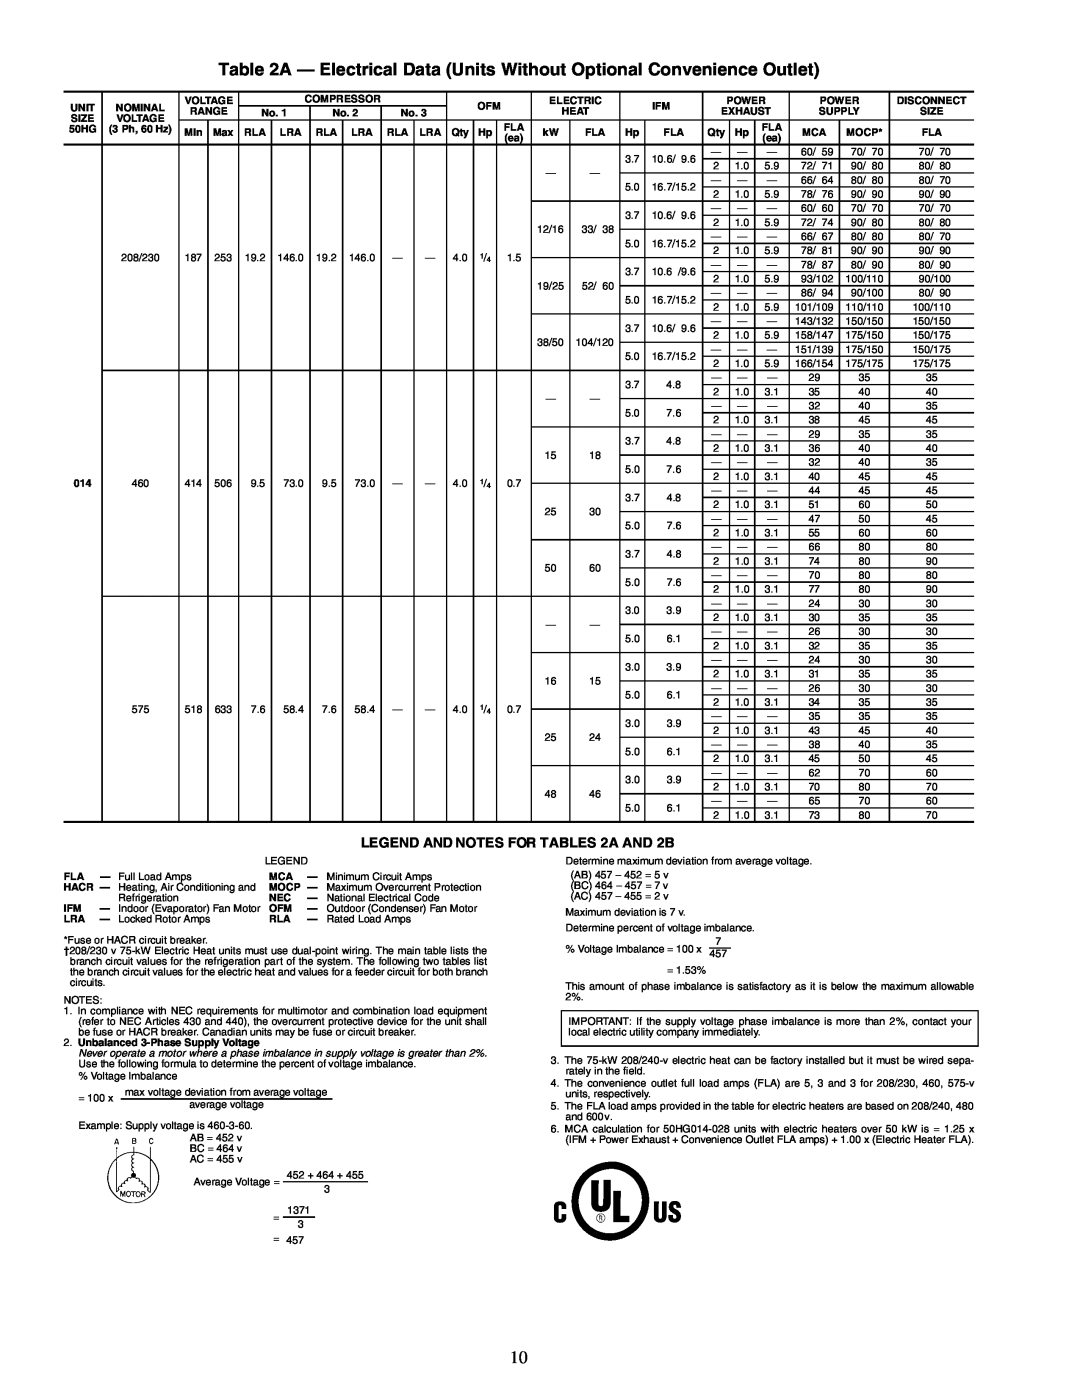 Carrier 50HG014-028 installation instructions LEGEND AND NOTES FOR TABLES 2A AND 2B 